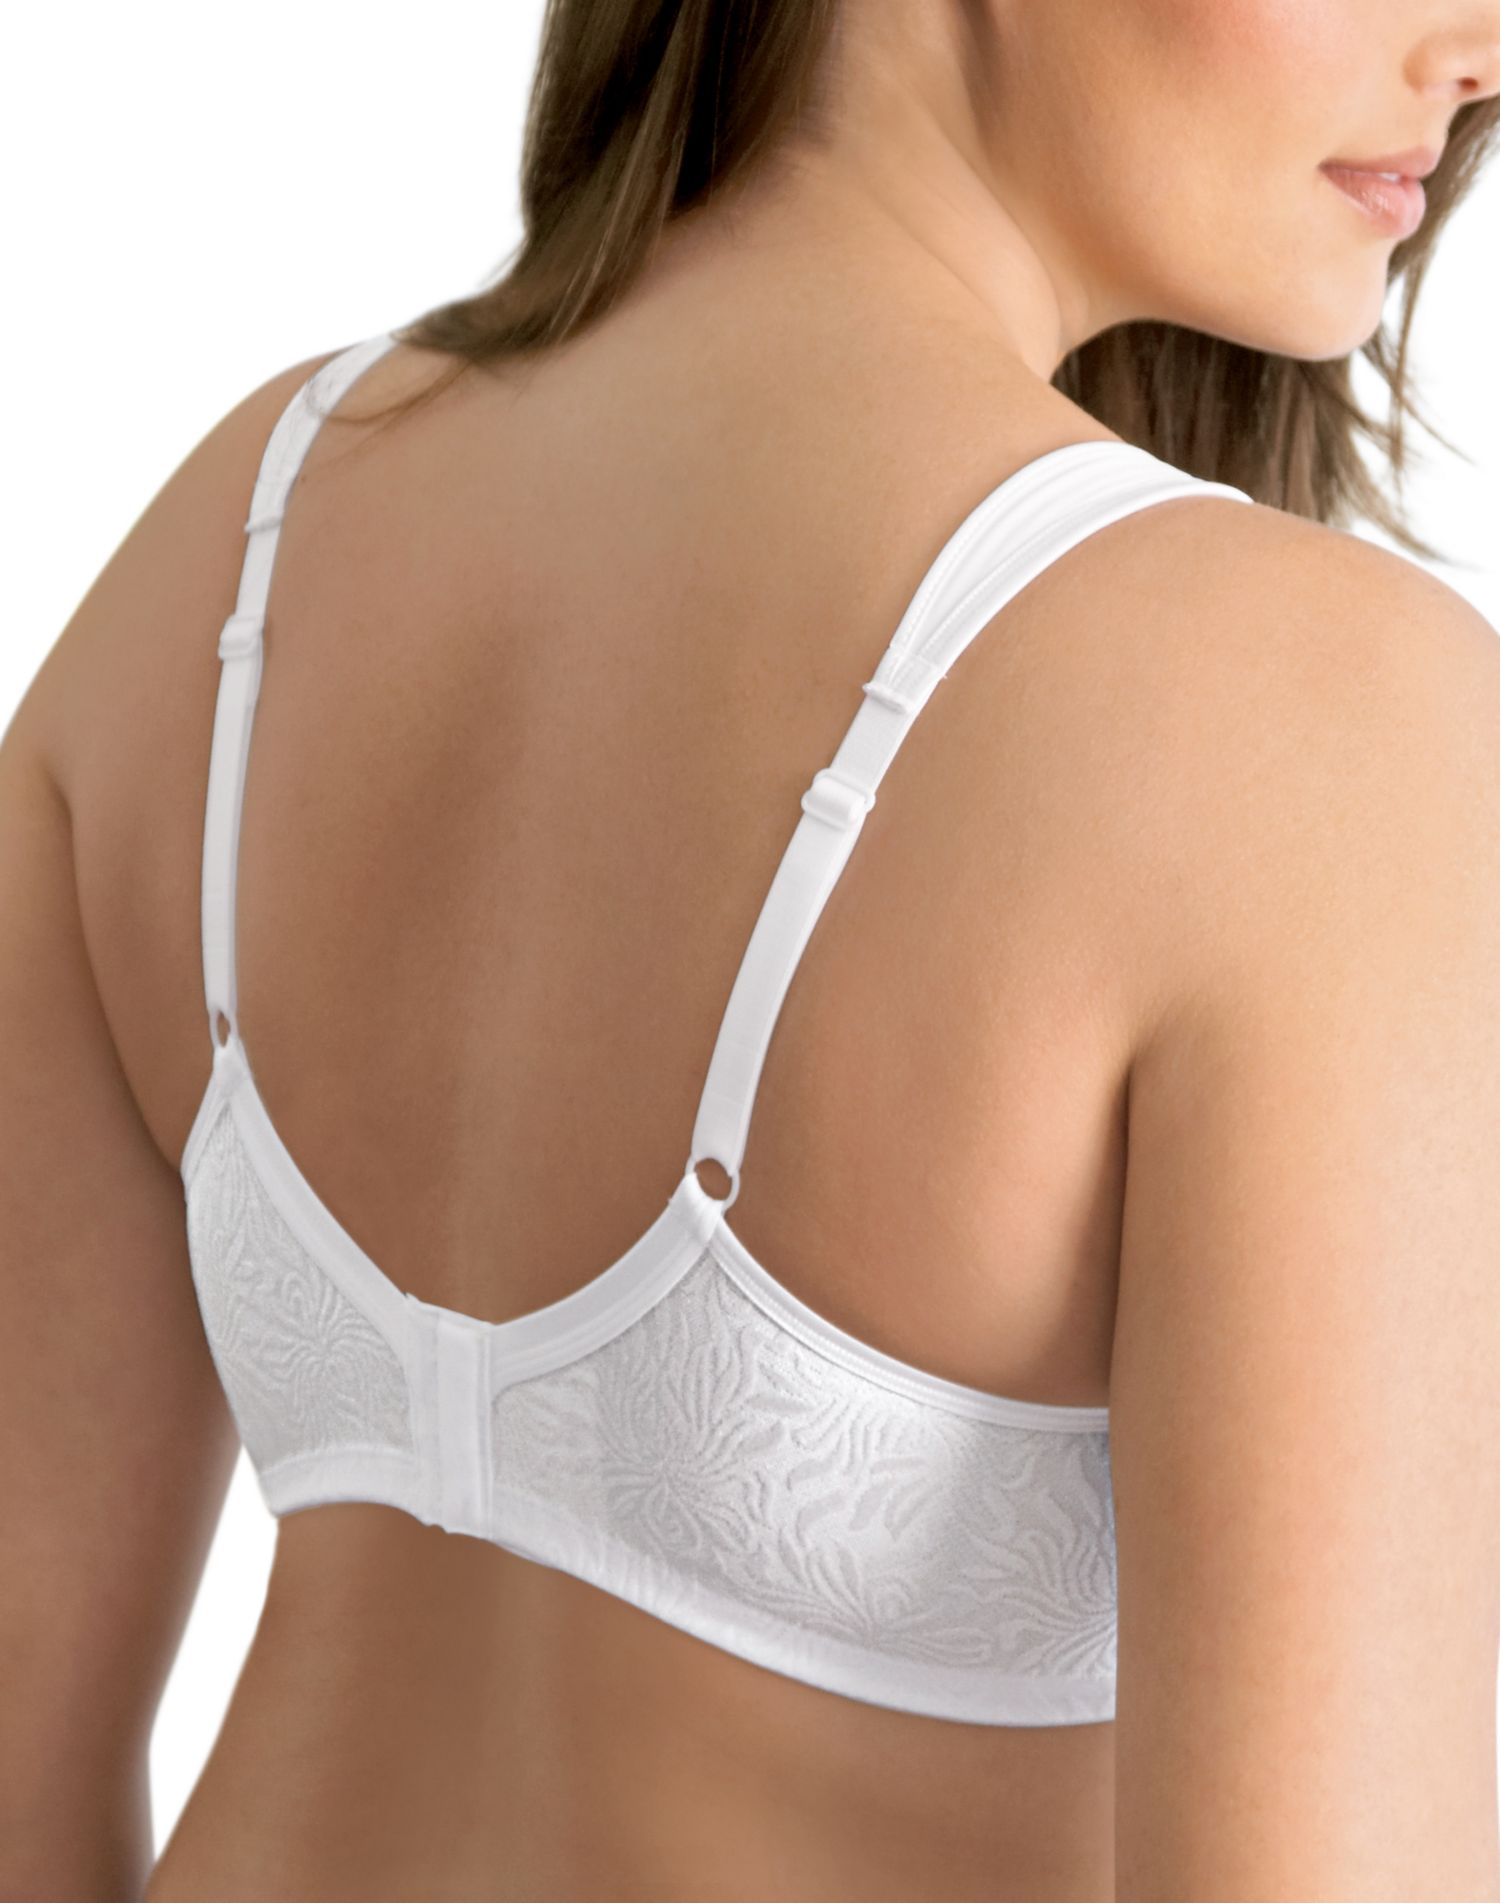 New PLAYTEX 18 HOUR Wirefree BRA Back & Side Smoothing 4049 White 36D Cool  Dri